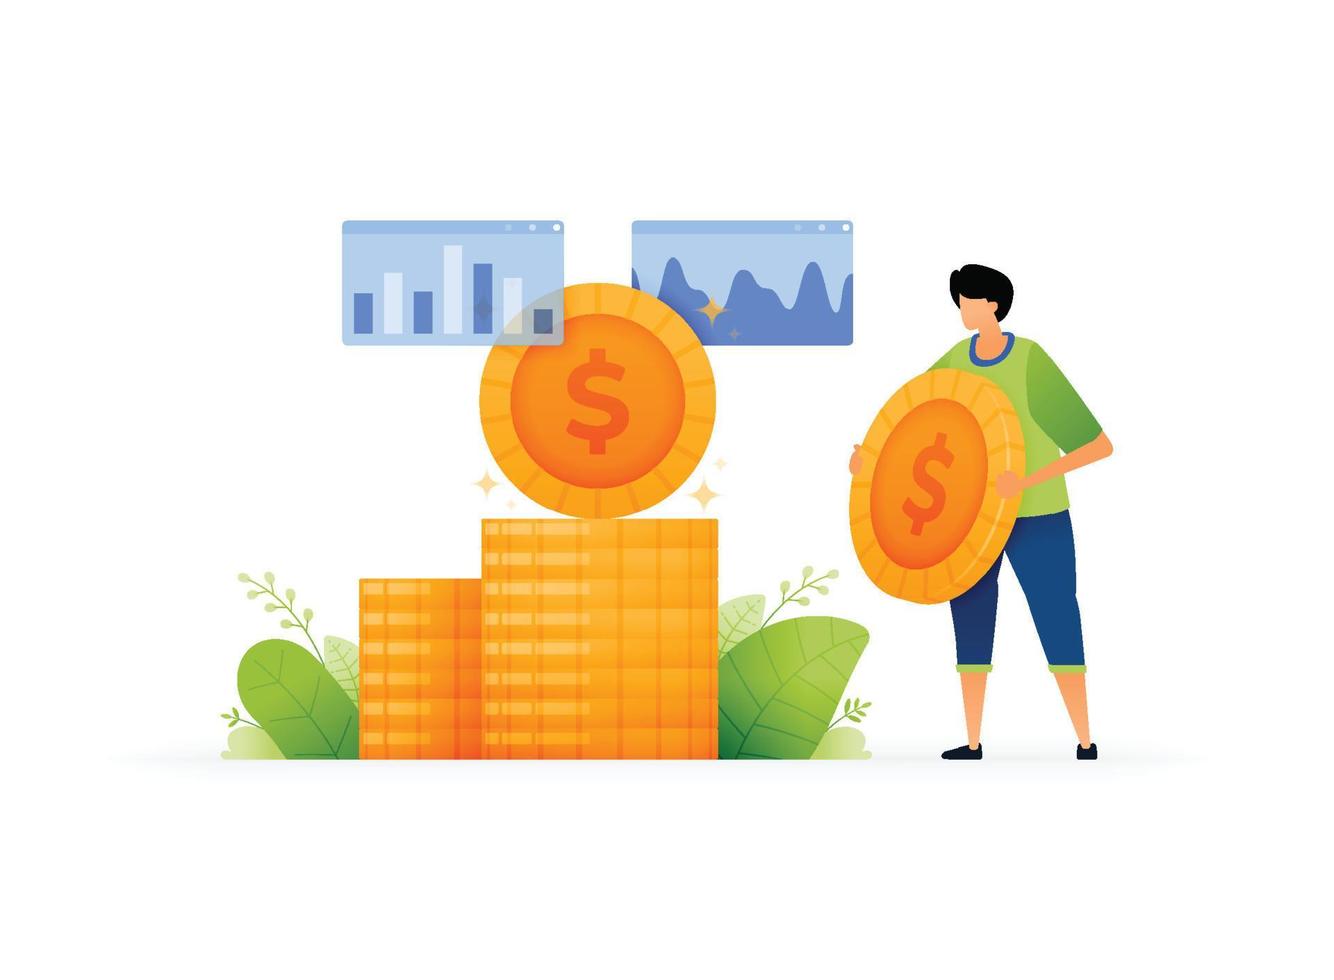 Vector illustration of Building Financial Freedom. Wealth Accumulation for Men. Smart Decisions Strategic Investing for the Future. Can use for ad, poster, campaign, website, apps, social media